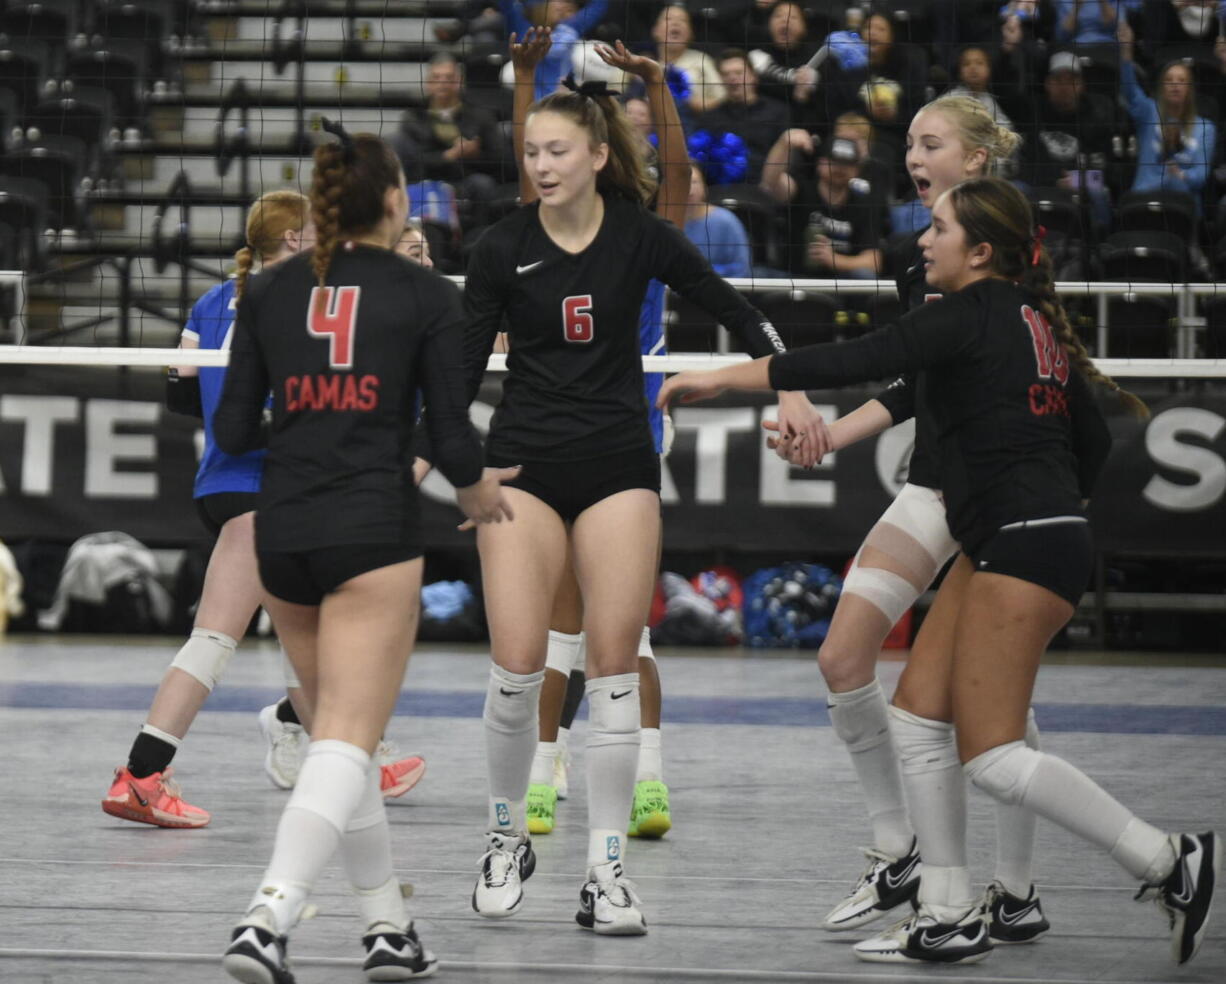 Camas players, from left, Emmah Sanchez, Avery Walunas, Ella Thompson and Mia Thorburn gather after a point against Curtis in the Class 4A state volleyball tournament on Saturday, Nov.